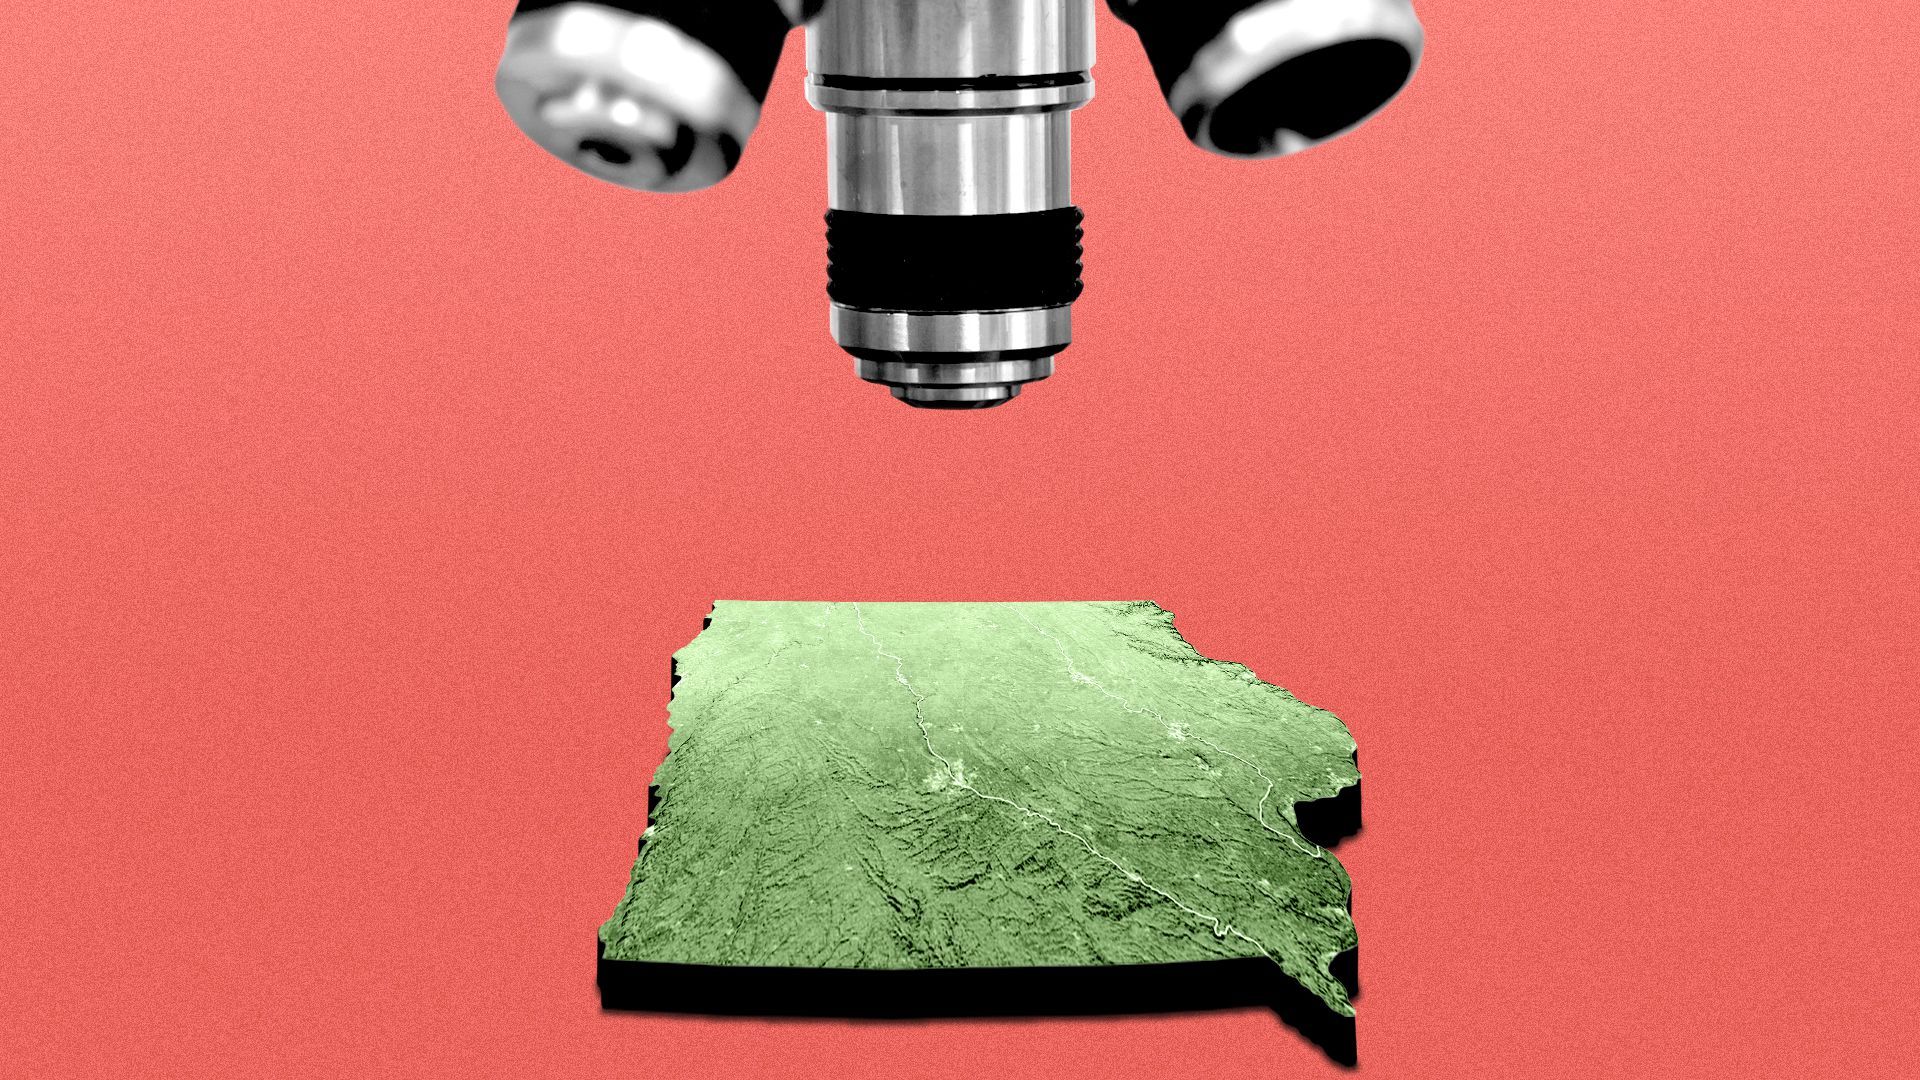 Illustration of a microscope over the state of Iowa.